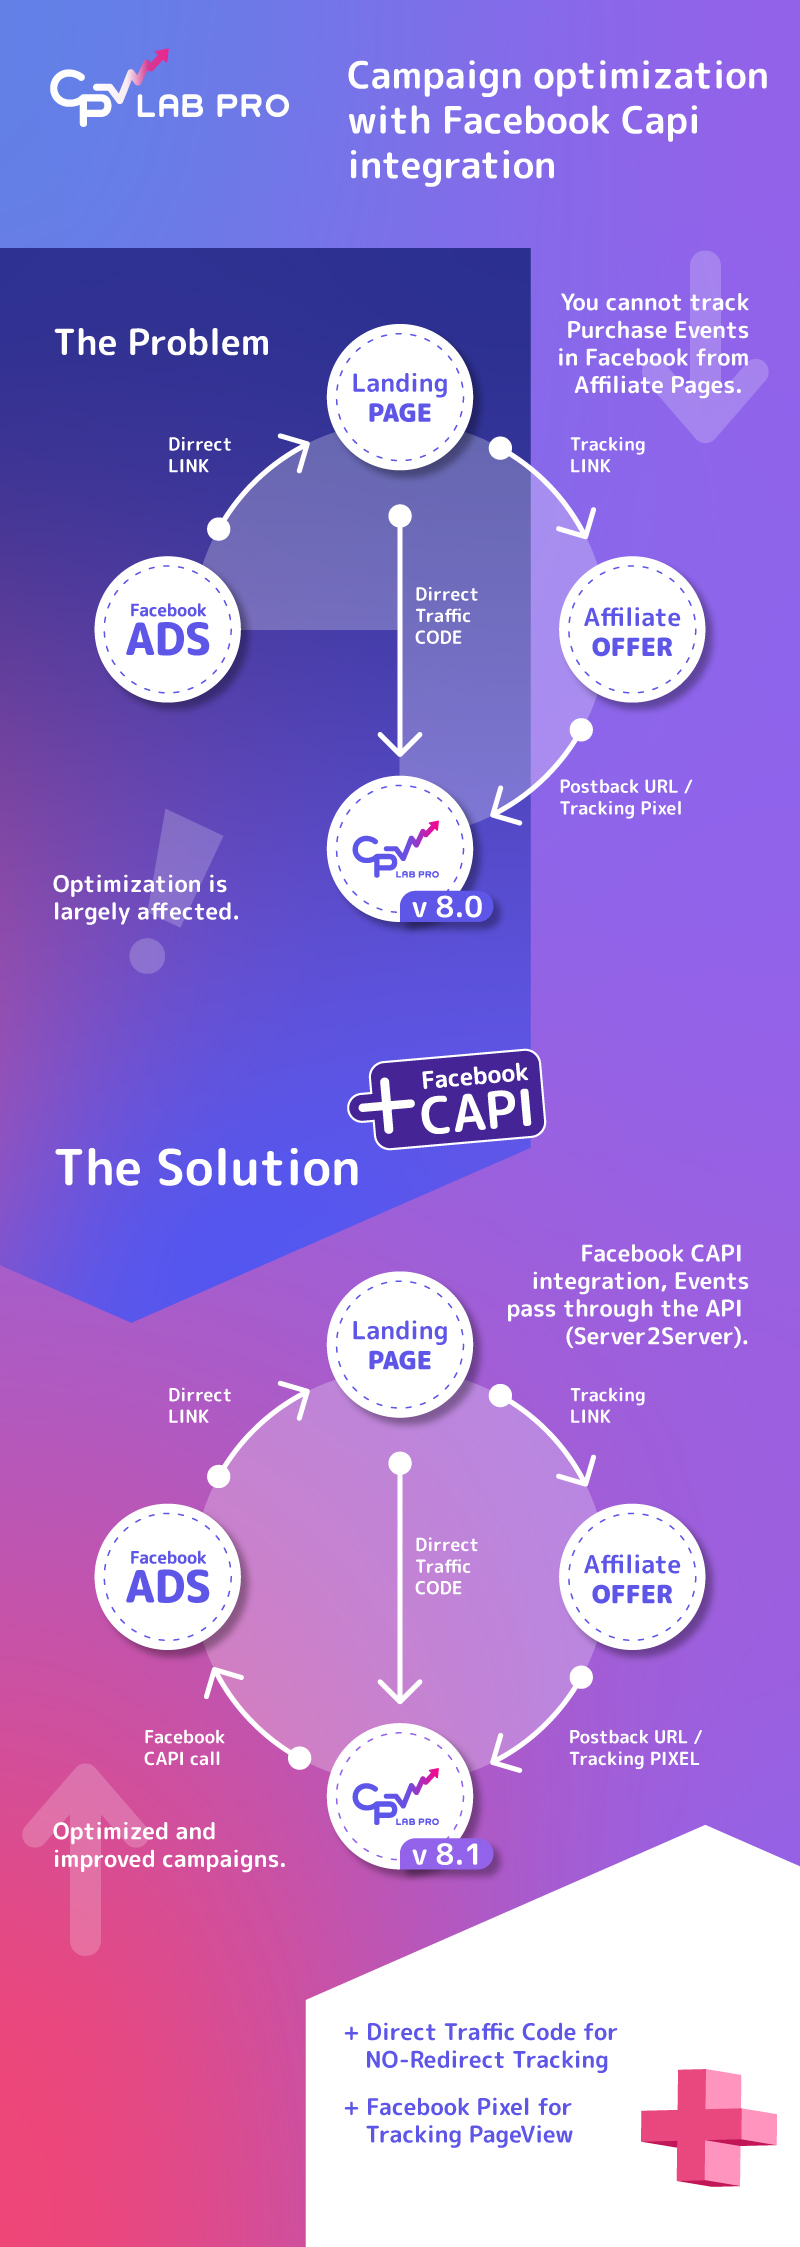 Campaign optimization with Facebook CAPI integration in CPV Lab PRO